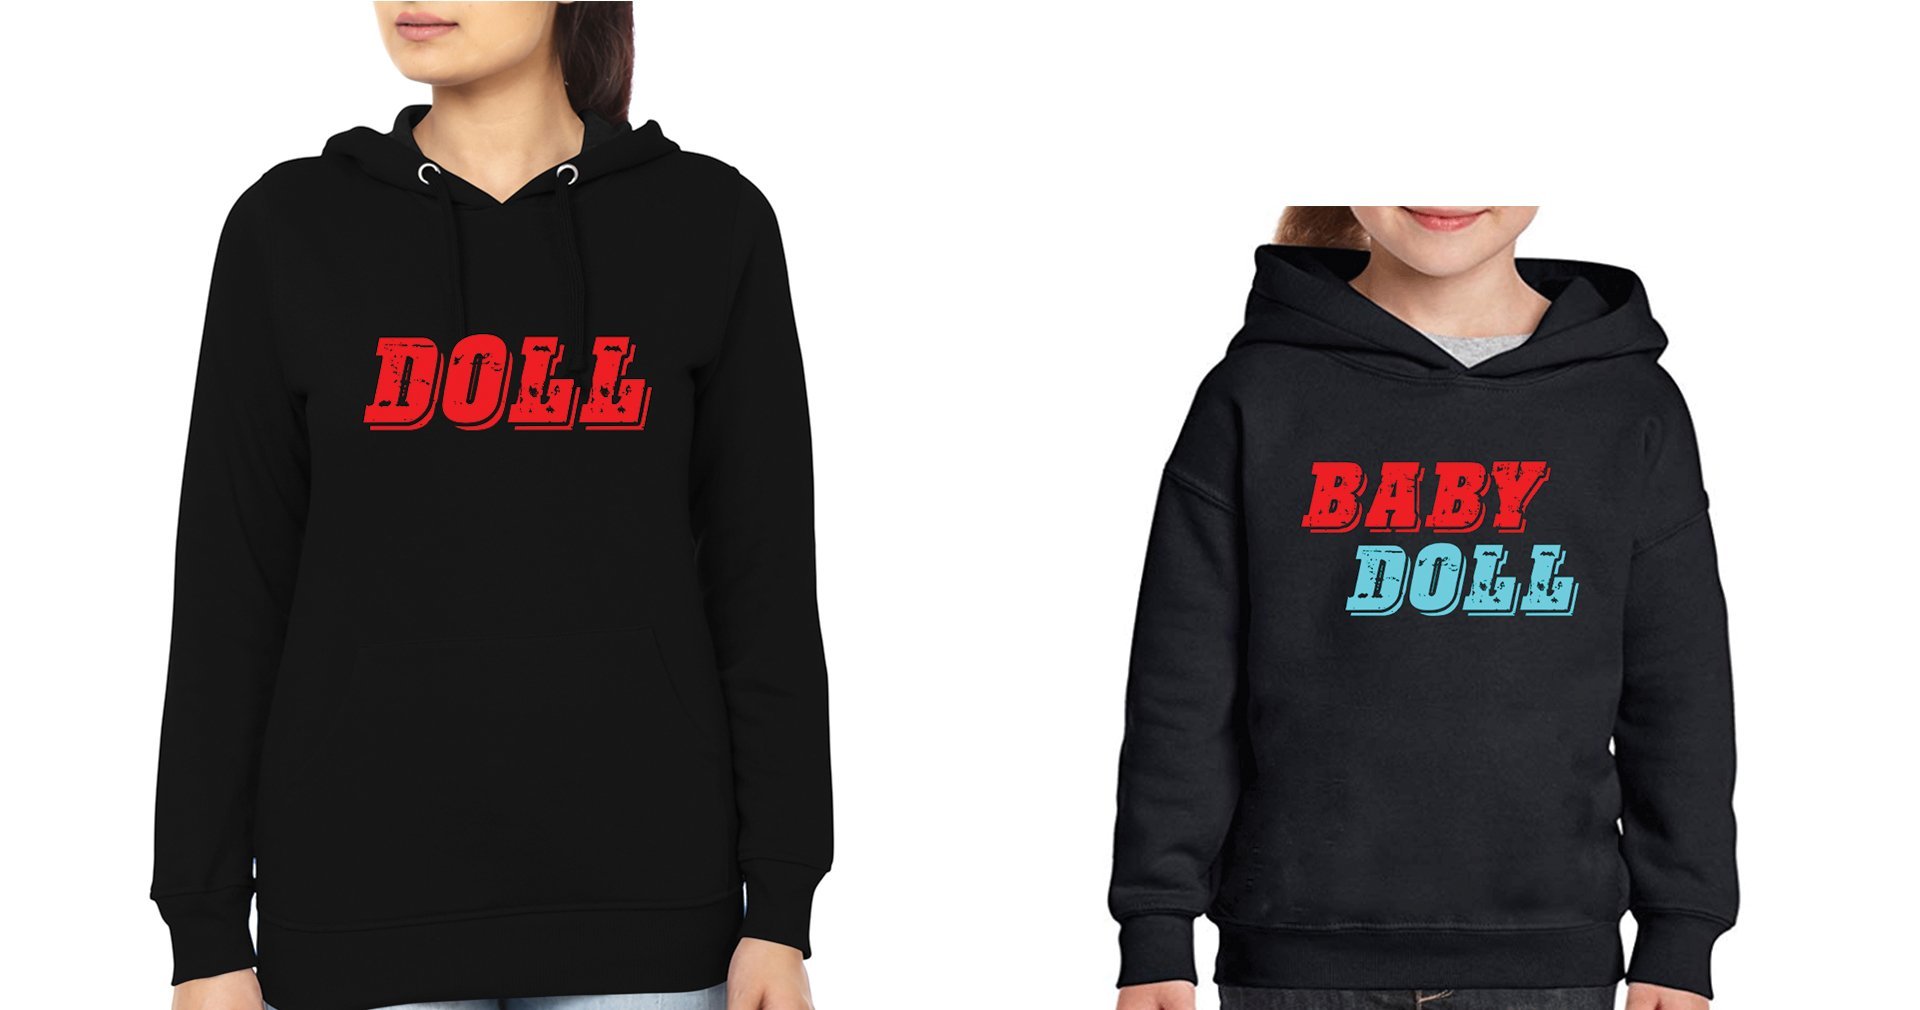 Doll Baby Doll Mother and Daughter Matching Hoodies- FunkyTradition